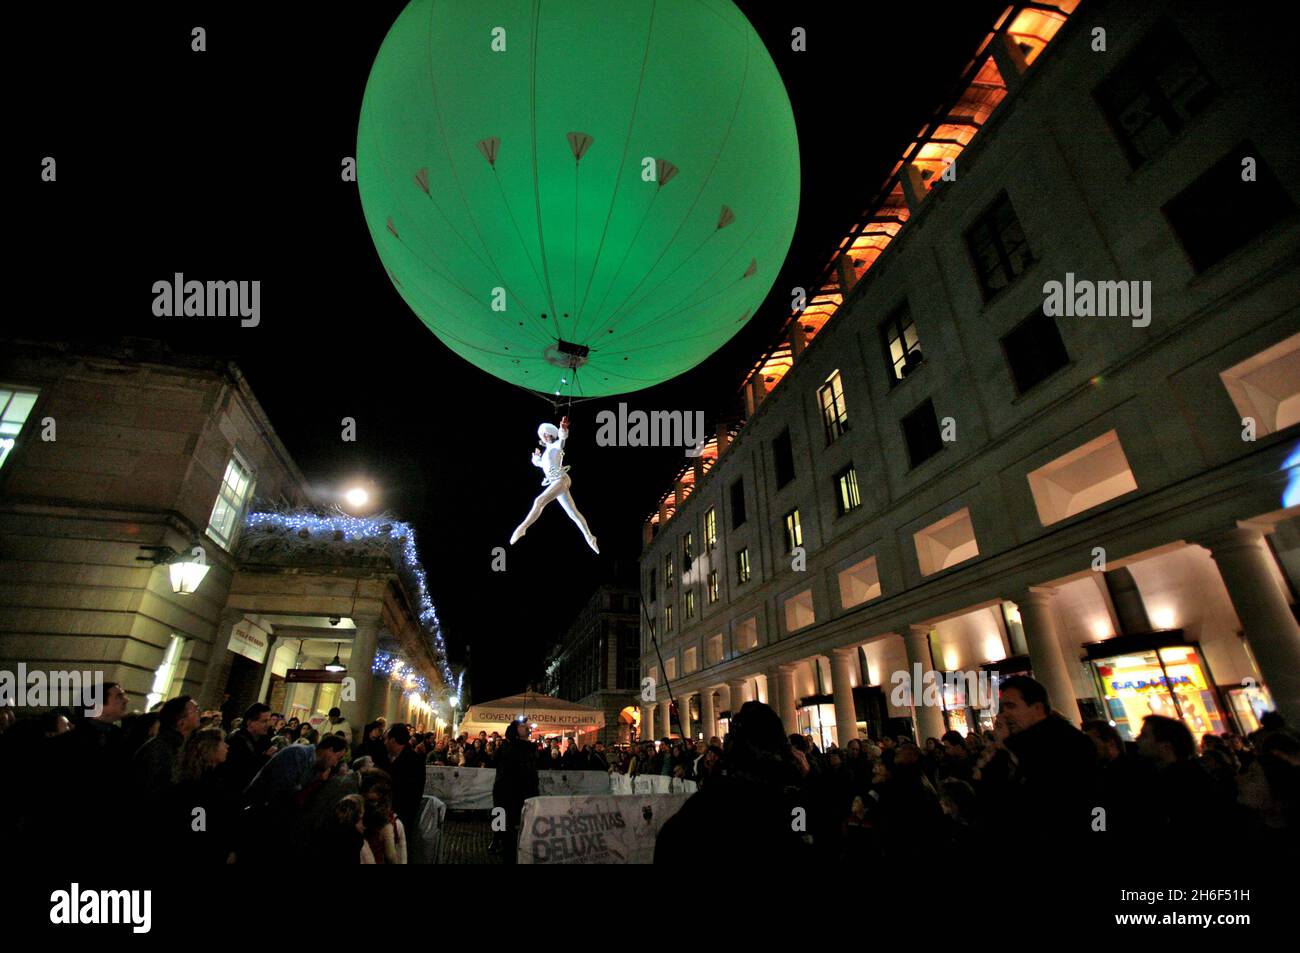 Heliosphere performing at London's Covent Garden as part of it's Christmas Deluxe season of events. Stock Photo